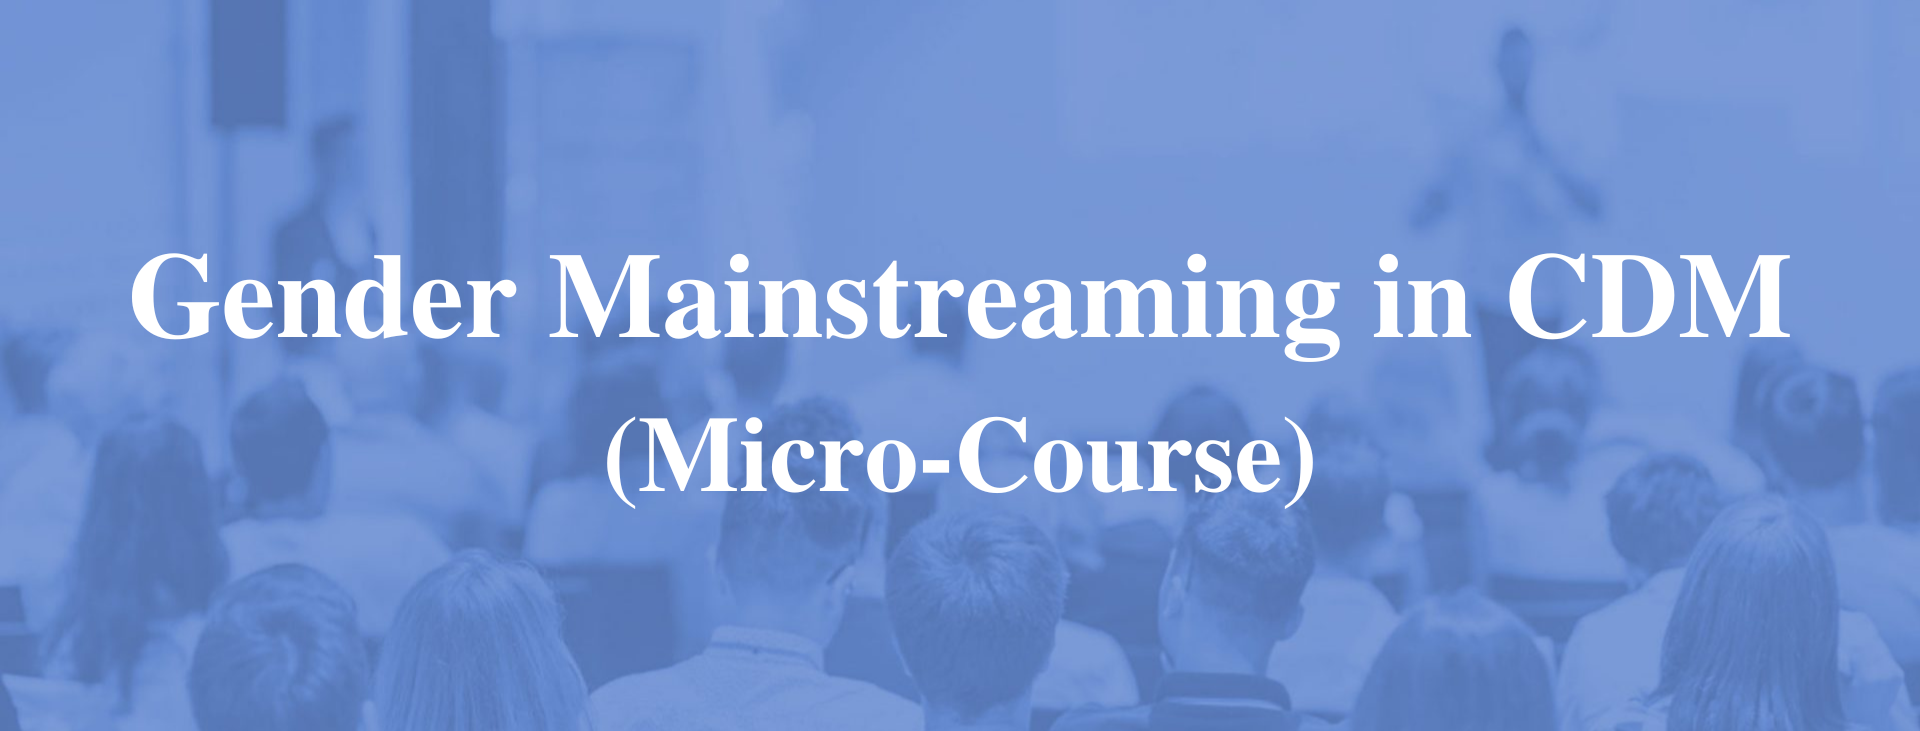 Gender Mainstreaming in CDM  (Micro-course)